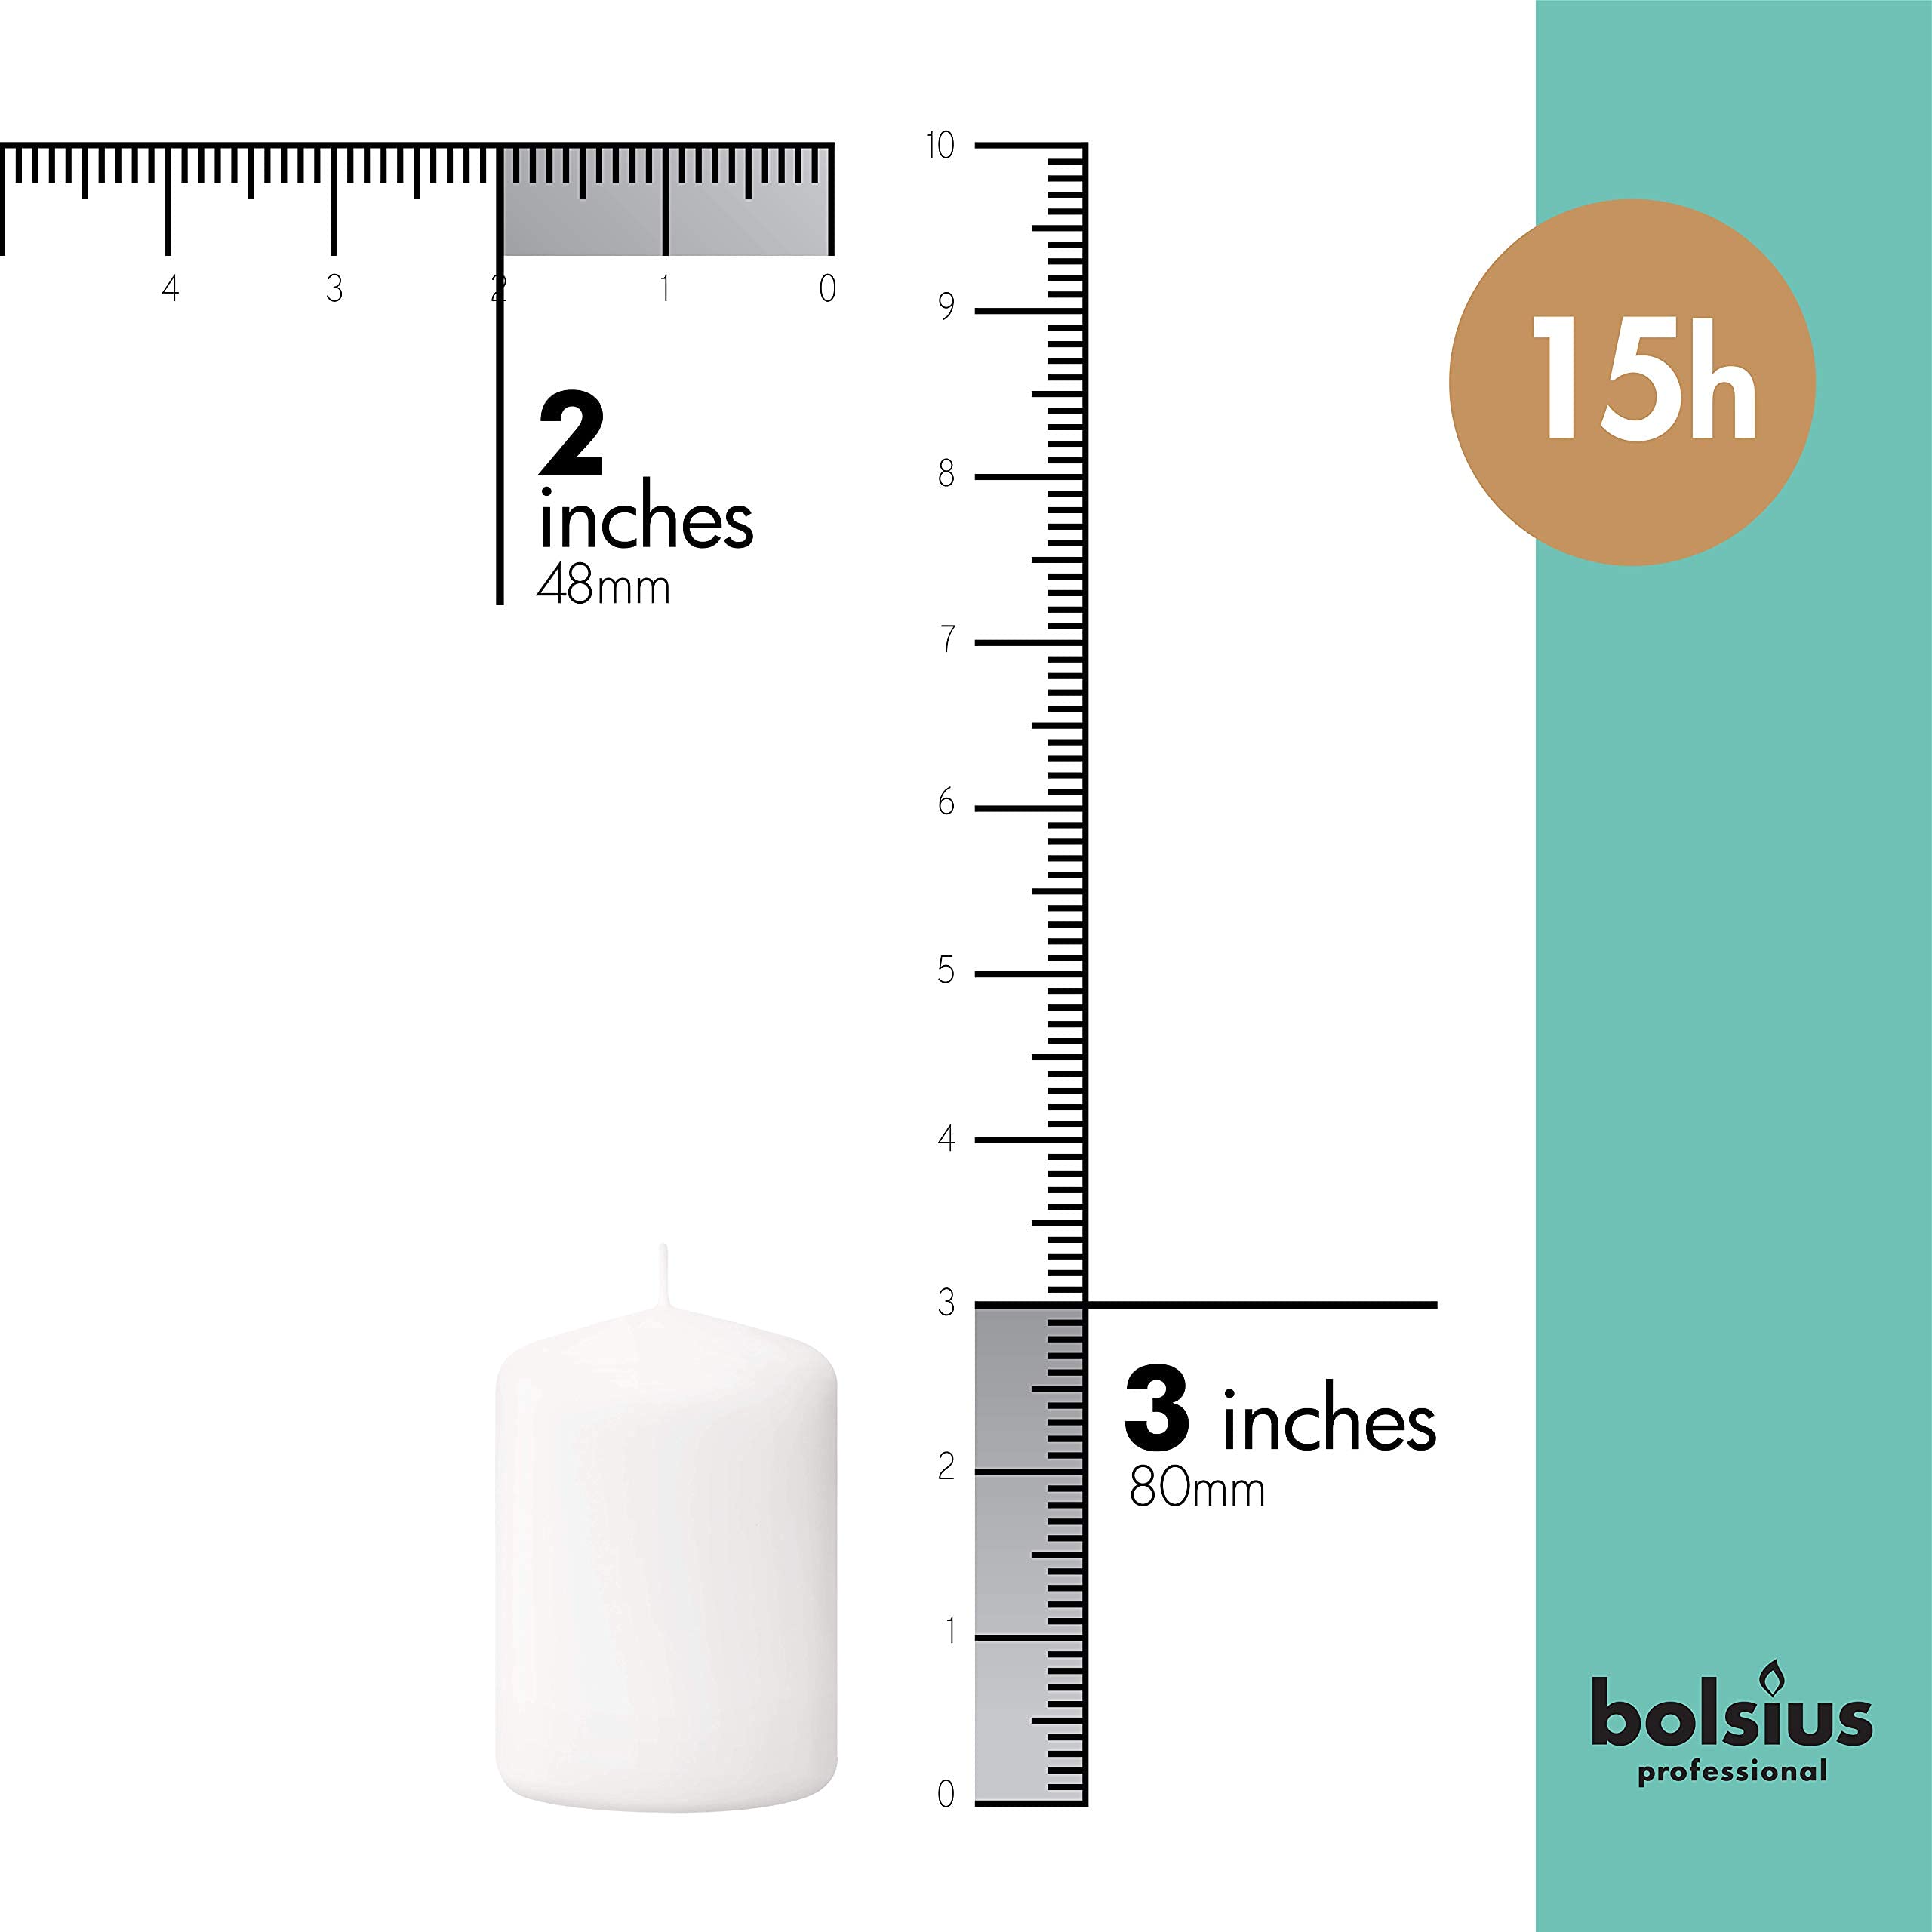 Bolsius White Pillar Candles – Unscented Candle Set of 20 – Dripless, Smokeless, and Clean Burning Household Dinner Candles – Perfect for Weddings, Parties, Dinners – 20 Decorative Candles  - Like New